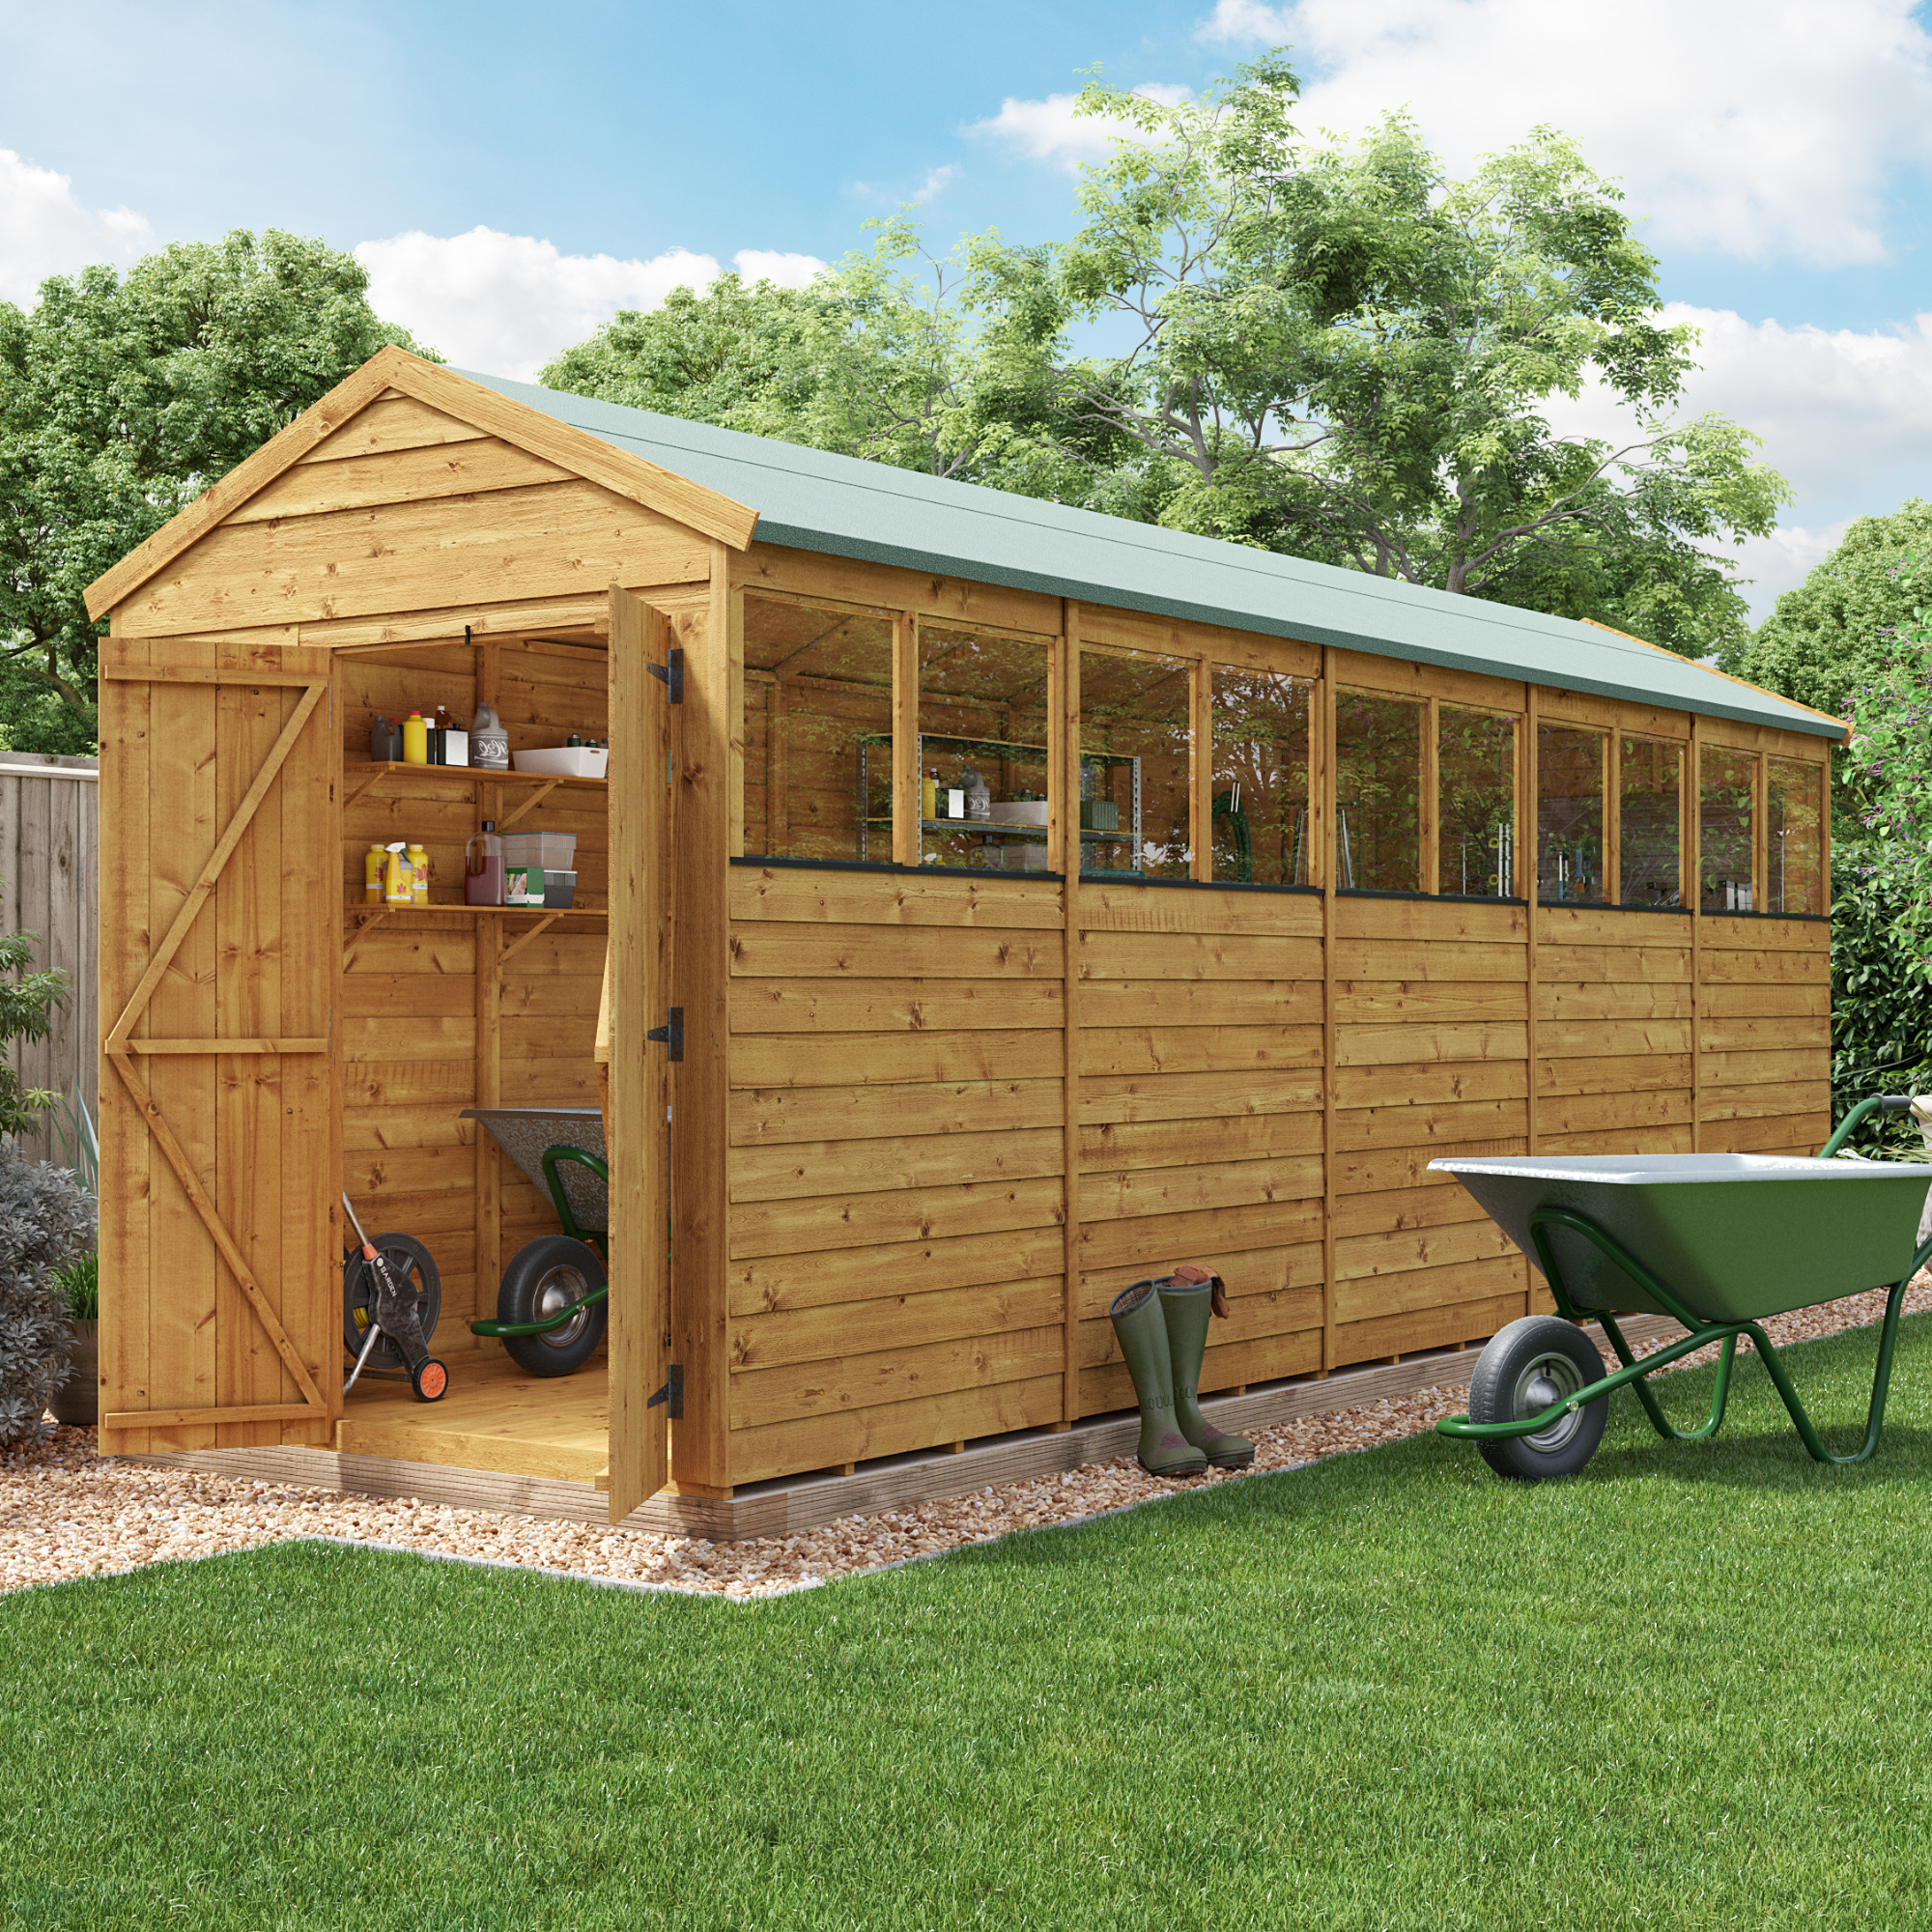 BillyOh Switch Overlap Apex Shed - 20x6 Windowed